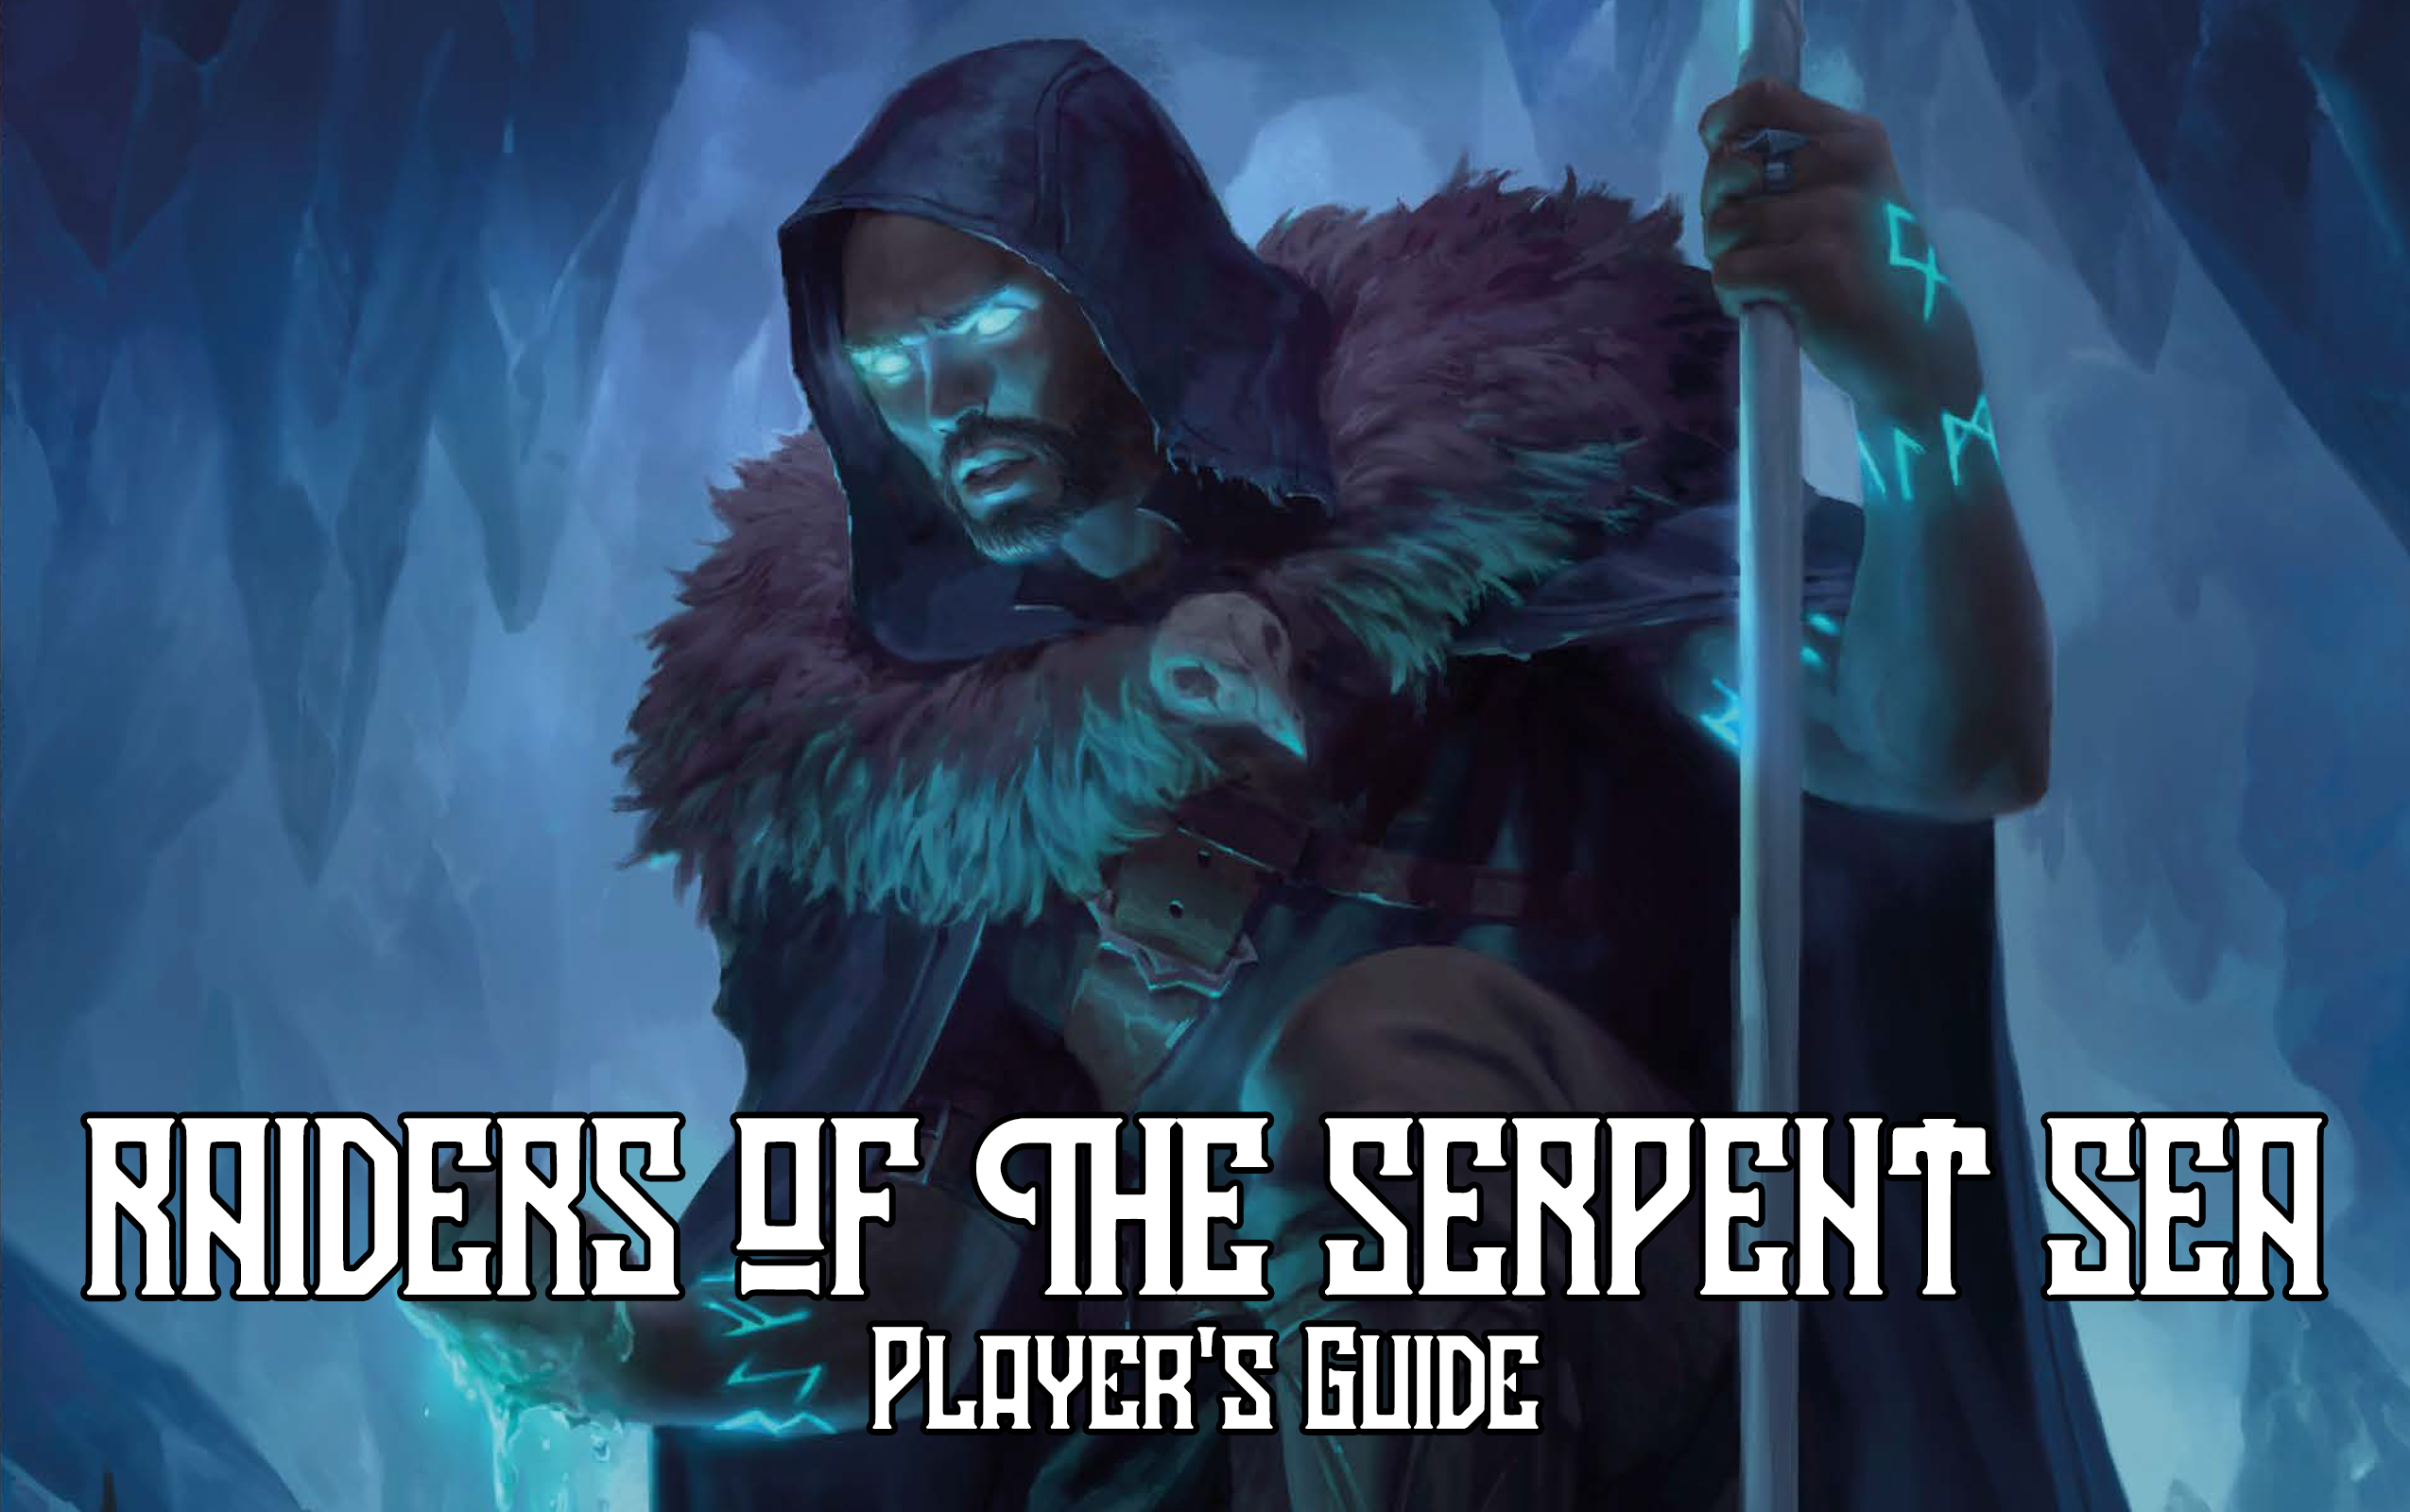 Raiders of the Serpent Sea - Player's Guide